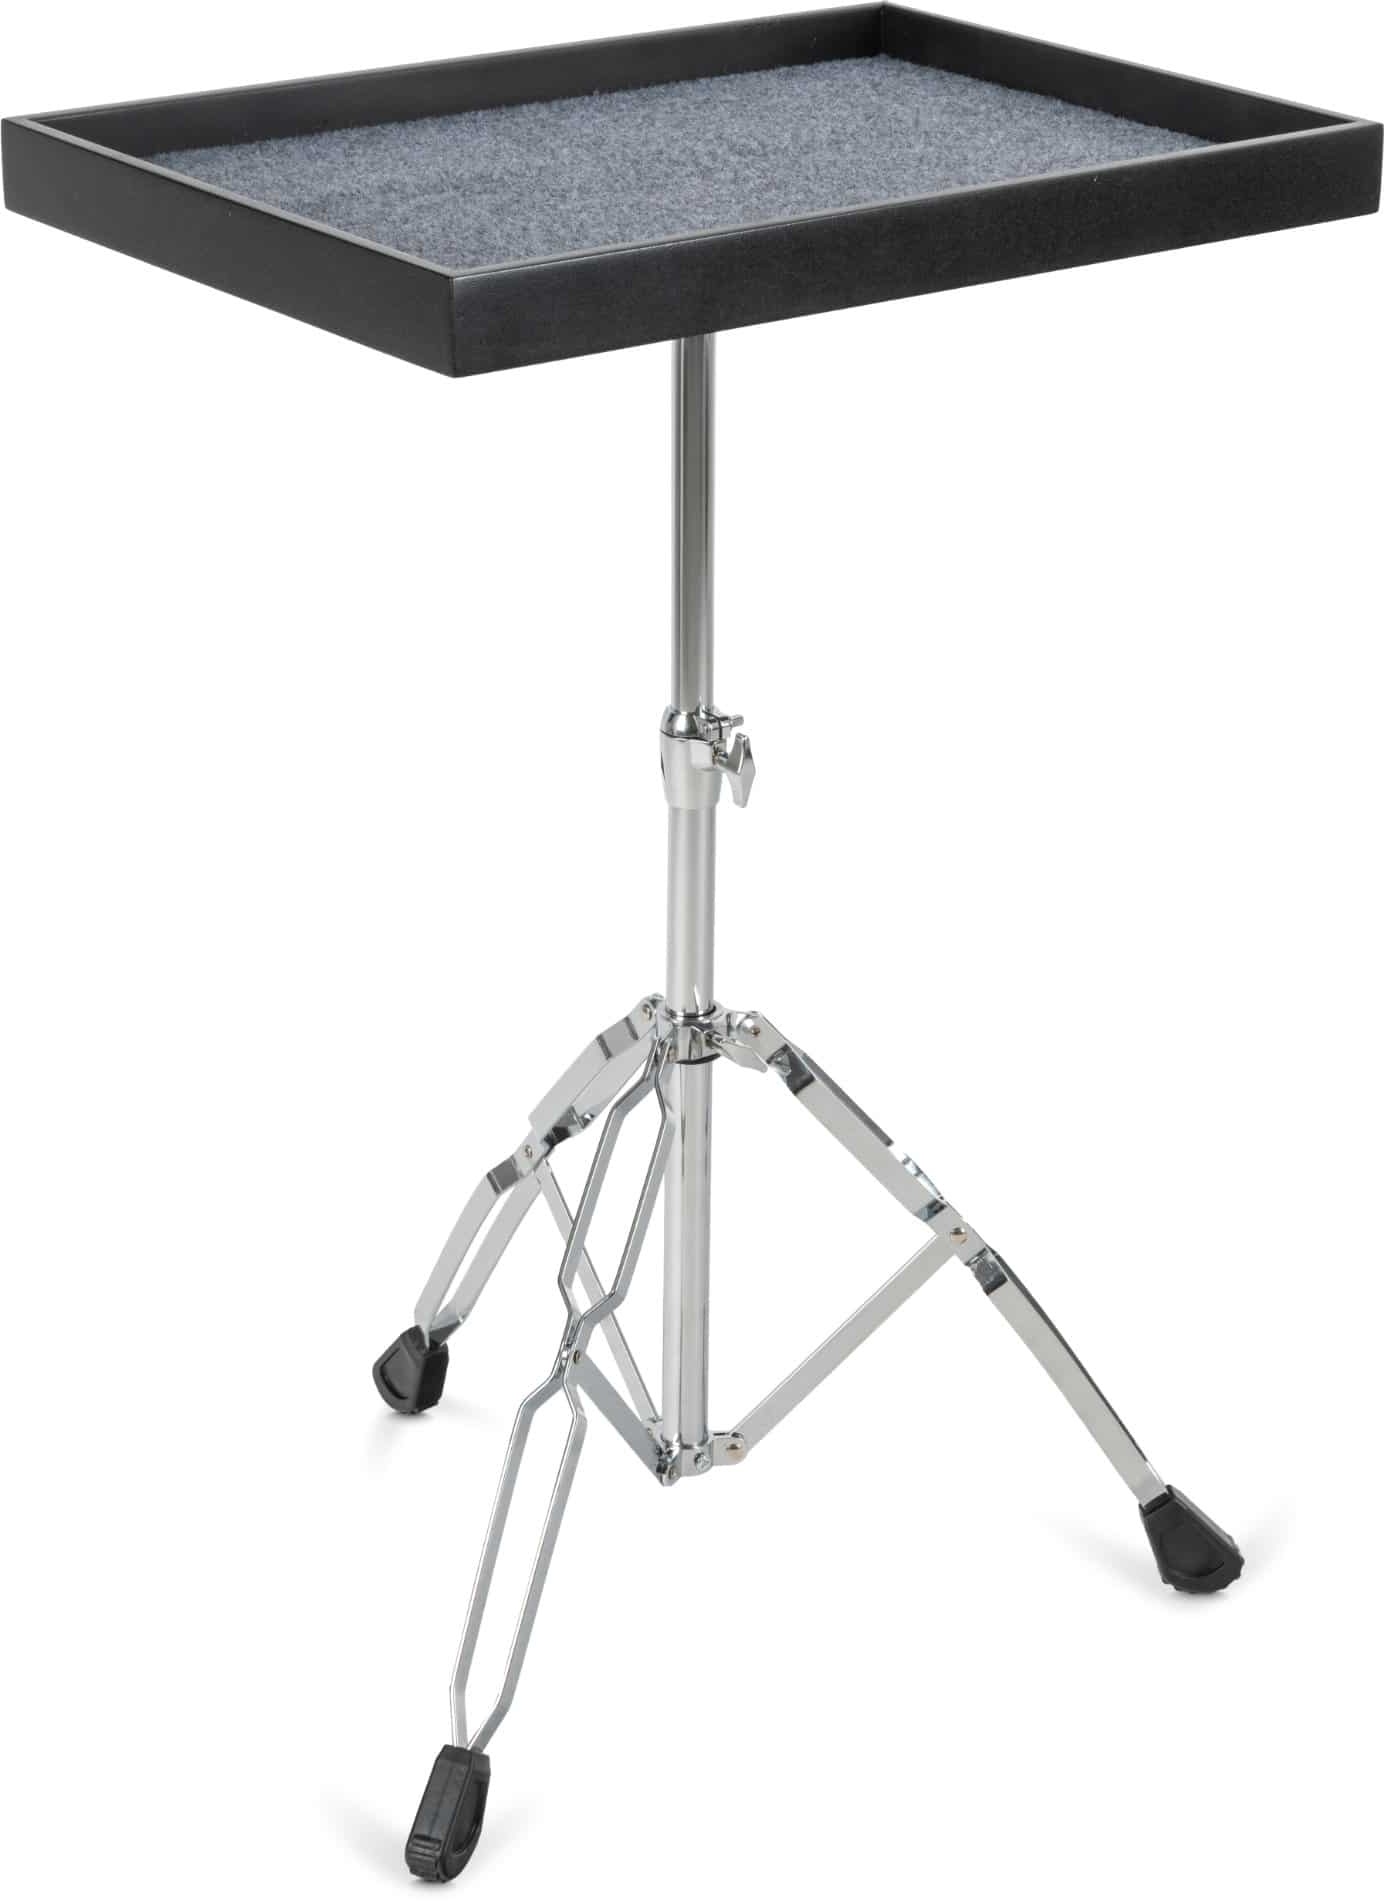 XDrum UPT1 Universal Percussion Table